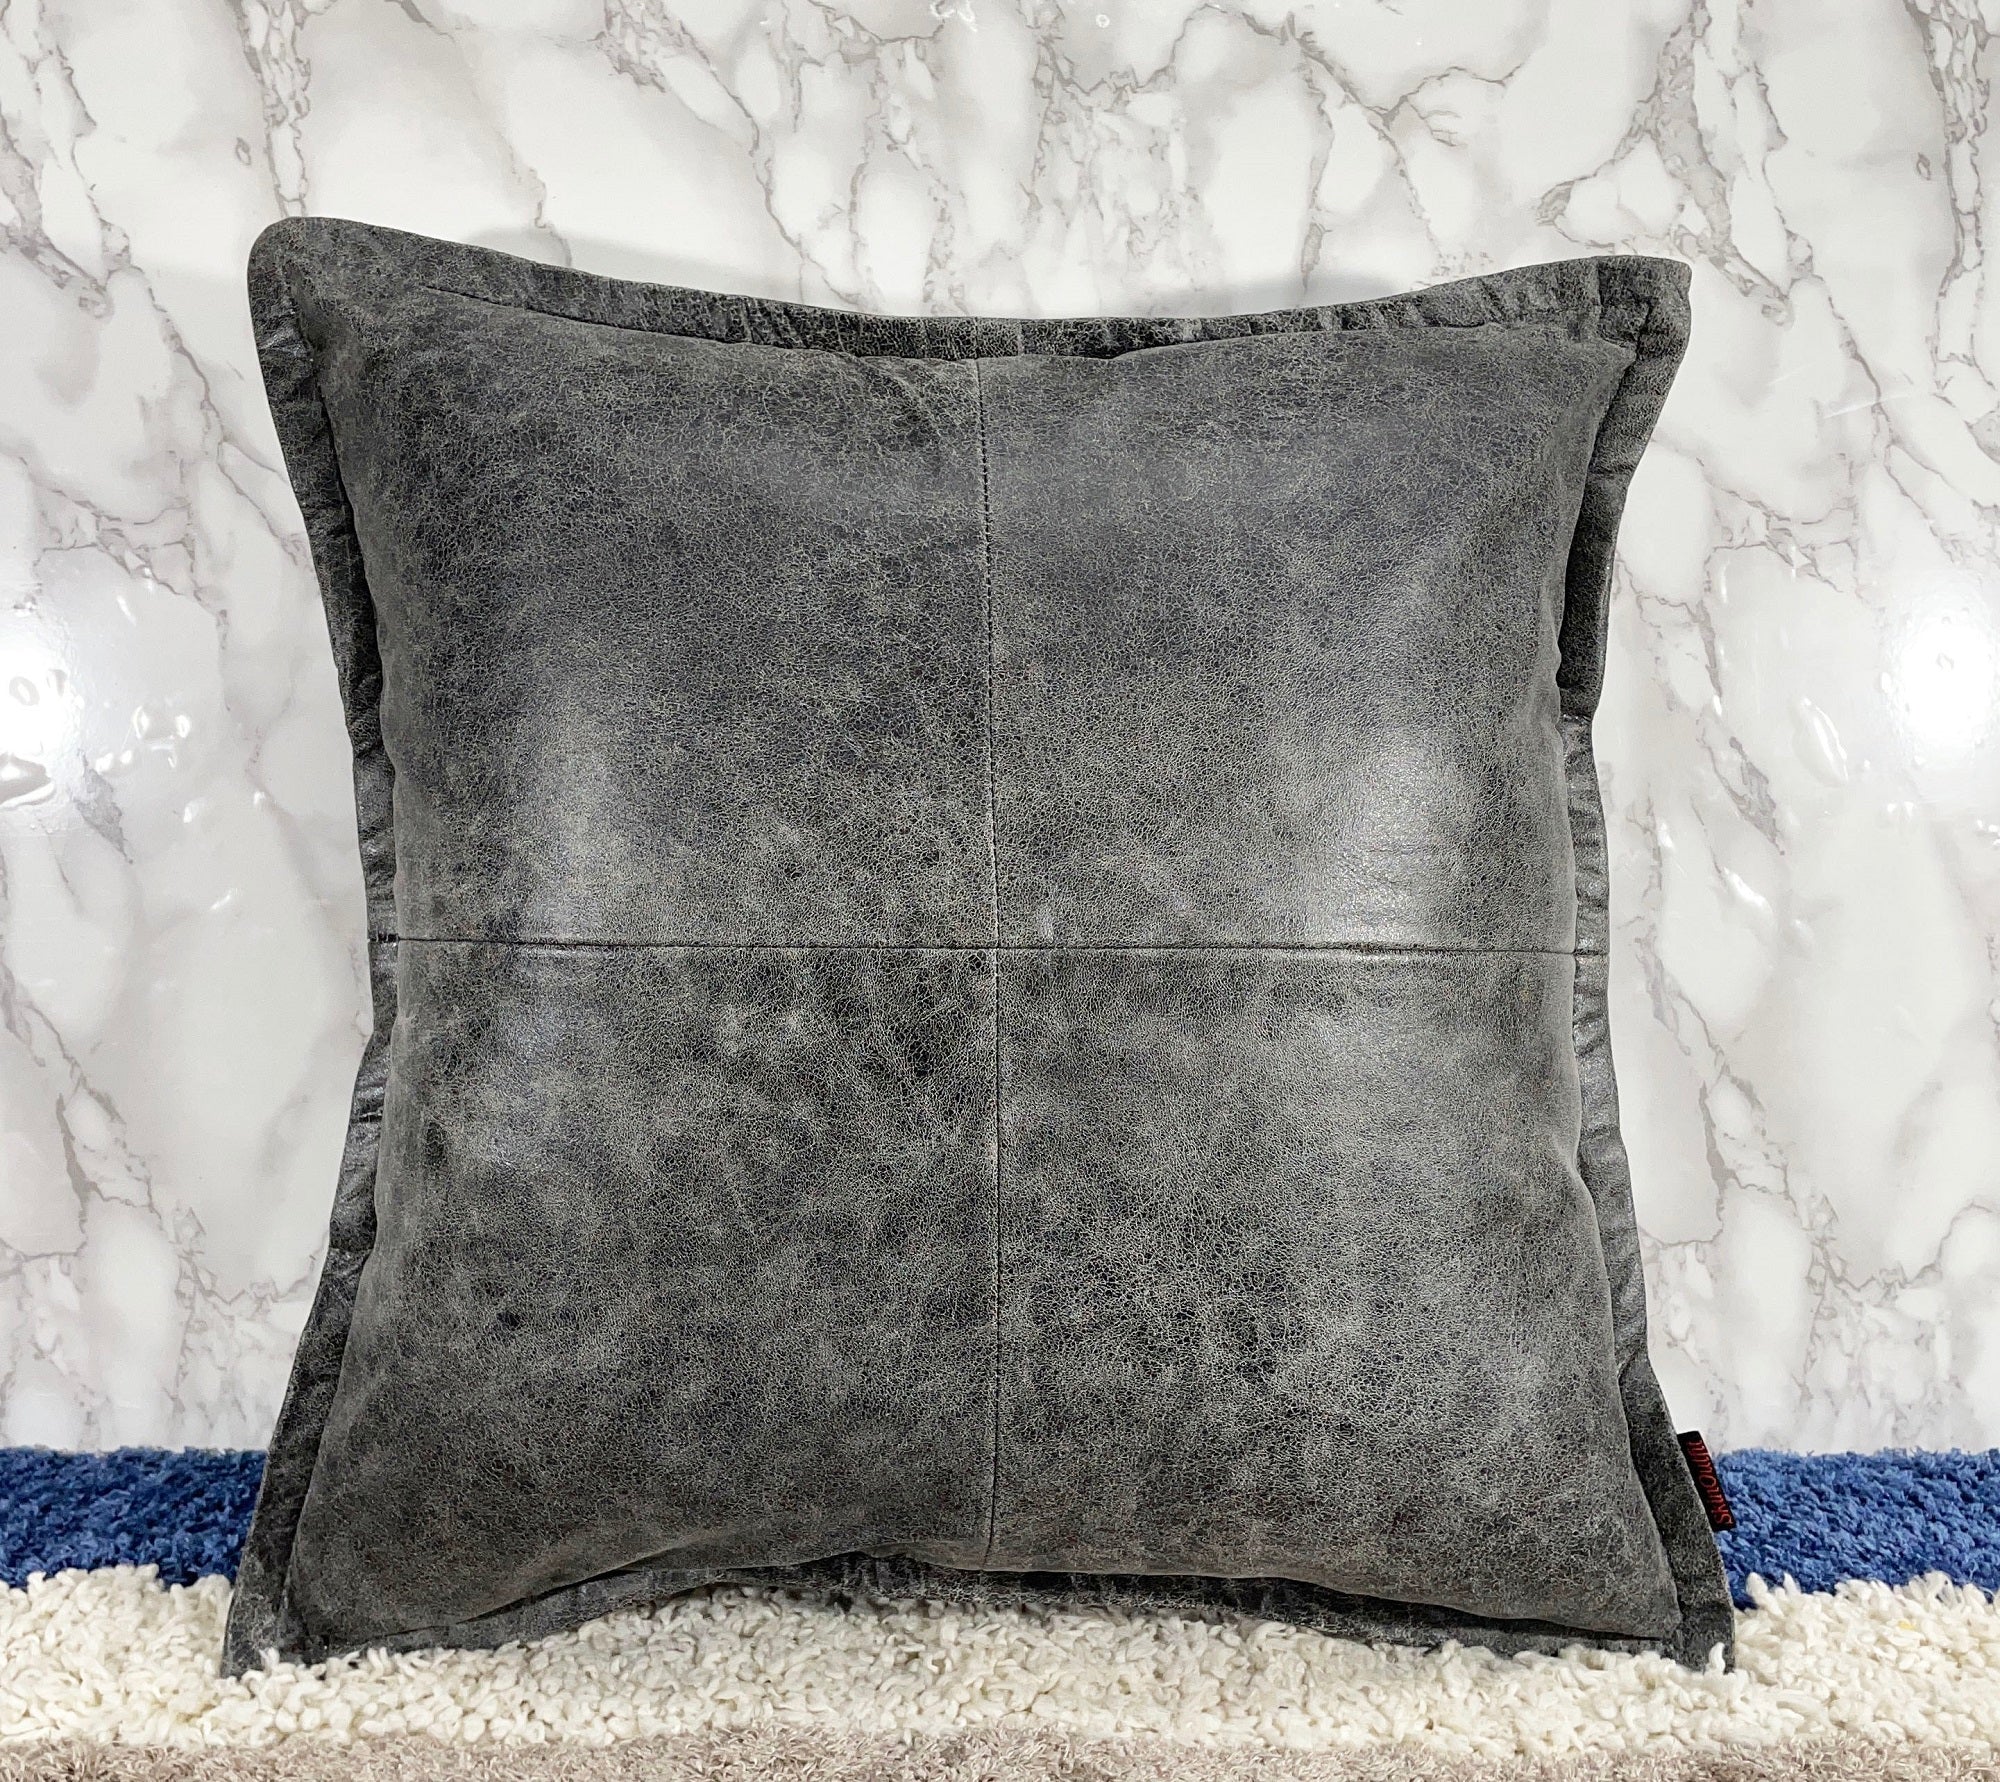 Genuine Leather Square Pillow Cover 28 SkinOutfit